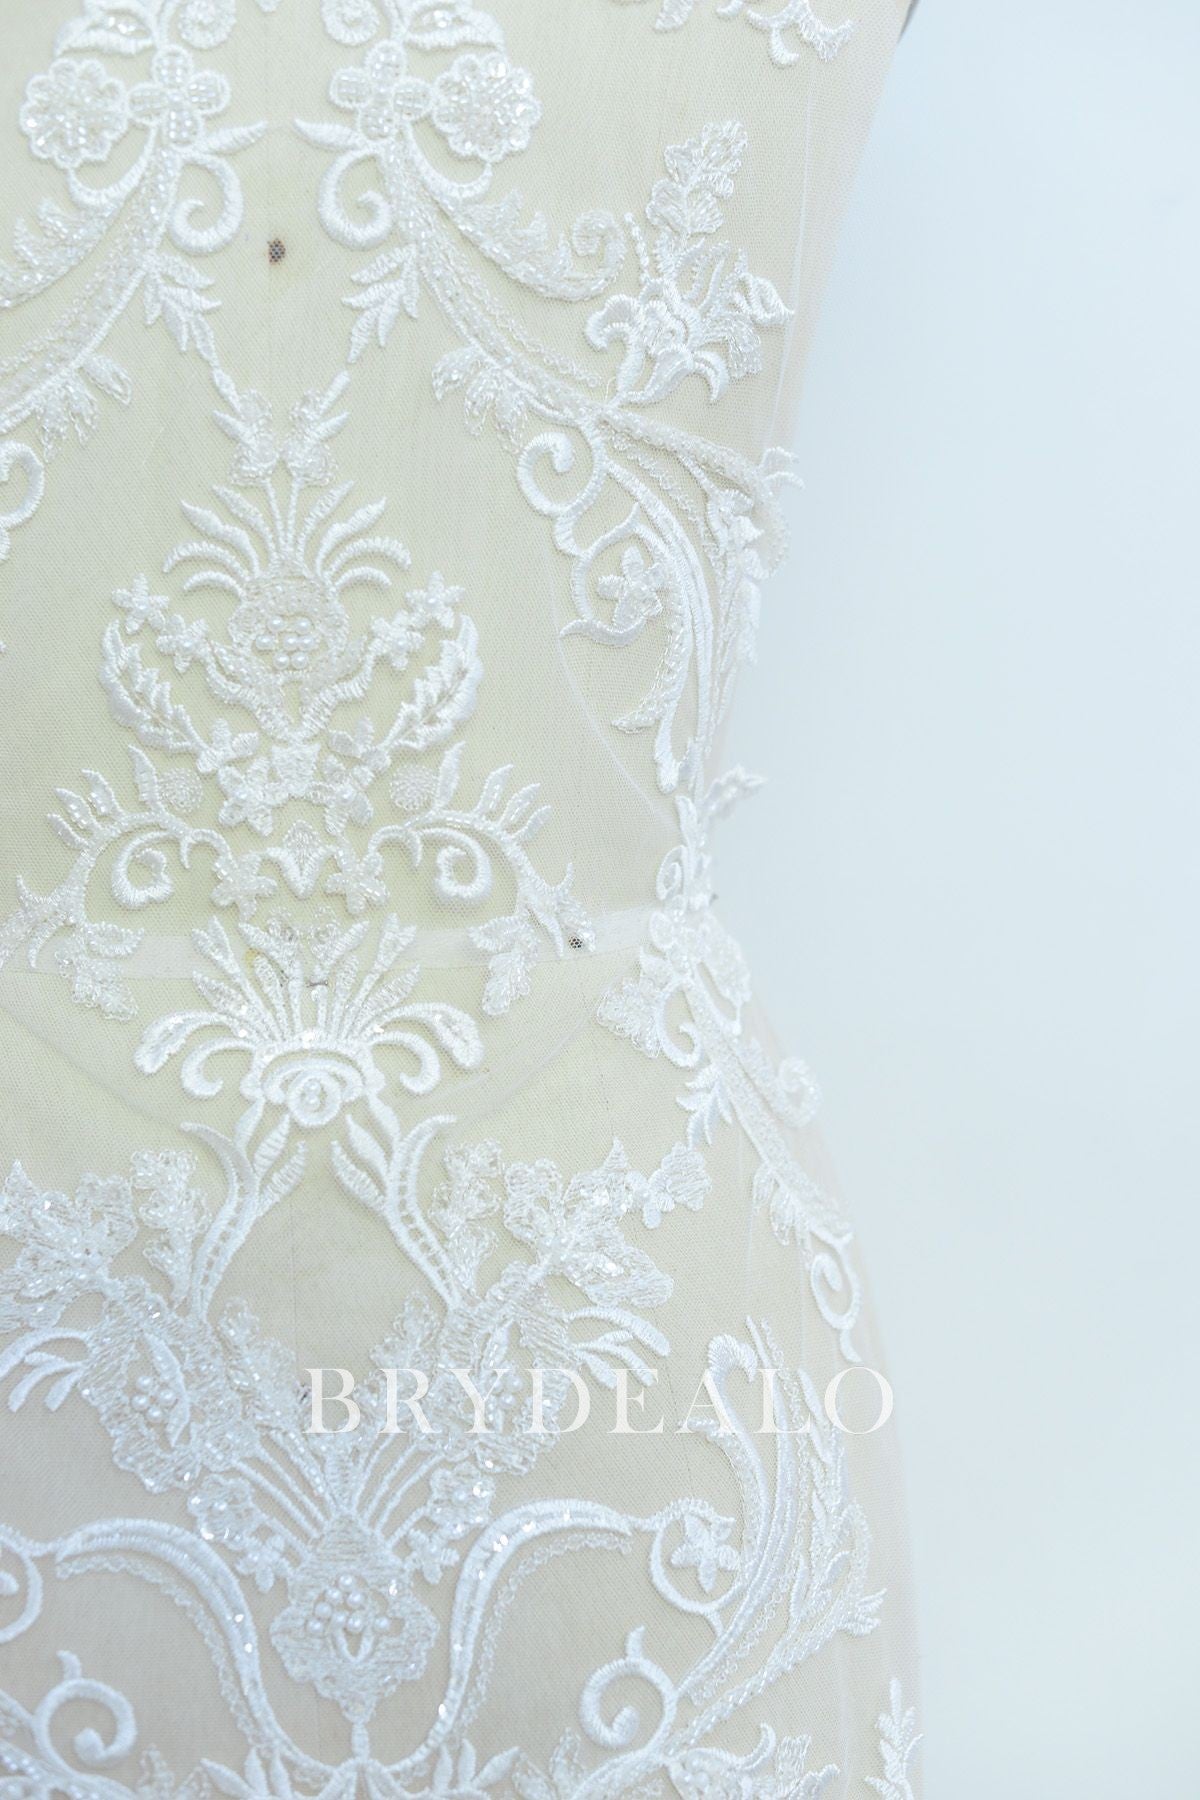 Shimmery Symmetrical Beaded Flower Lace Fabric Online